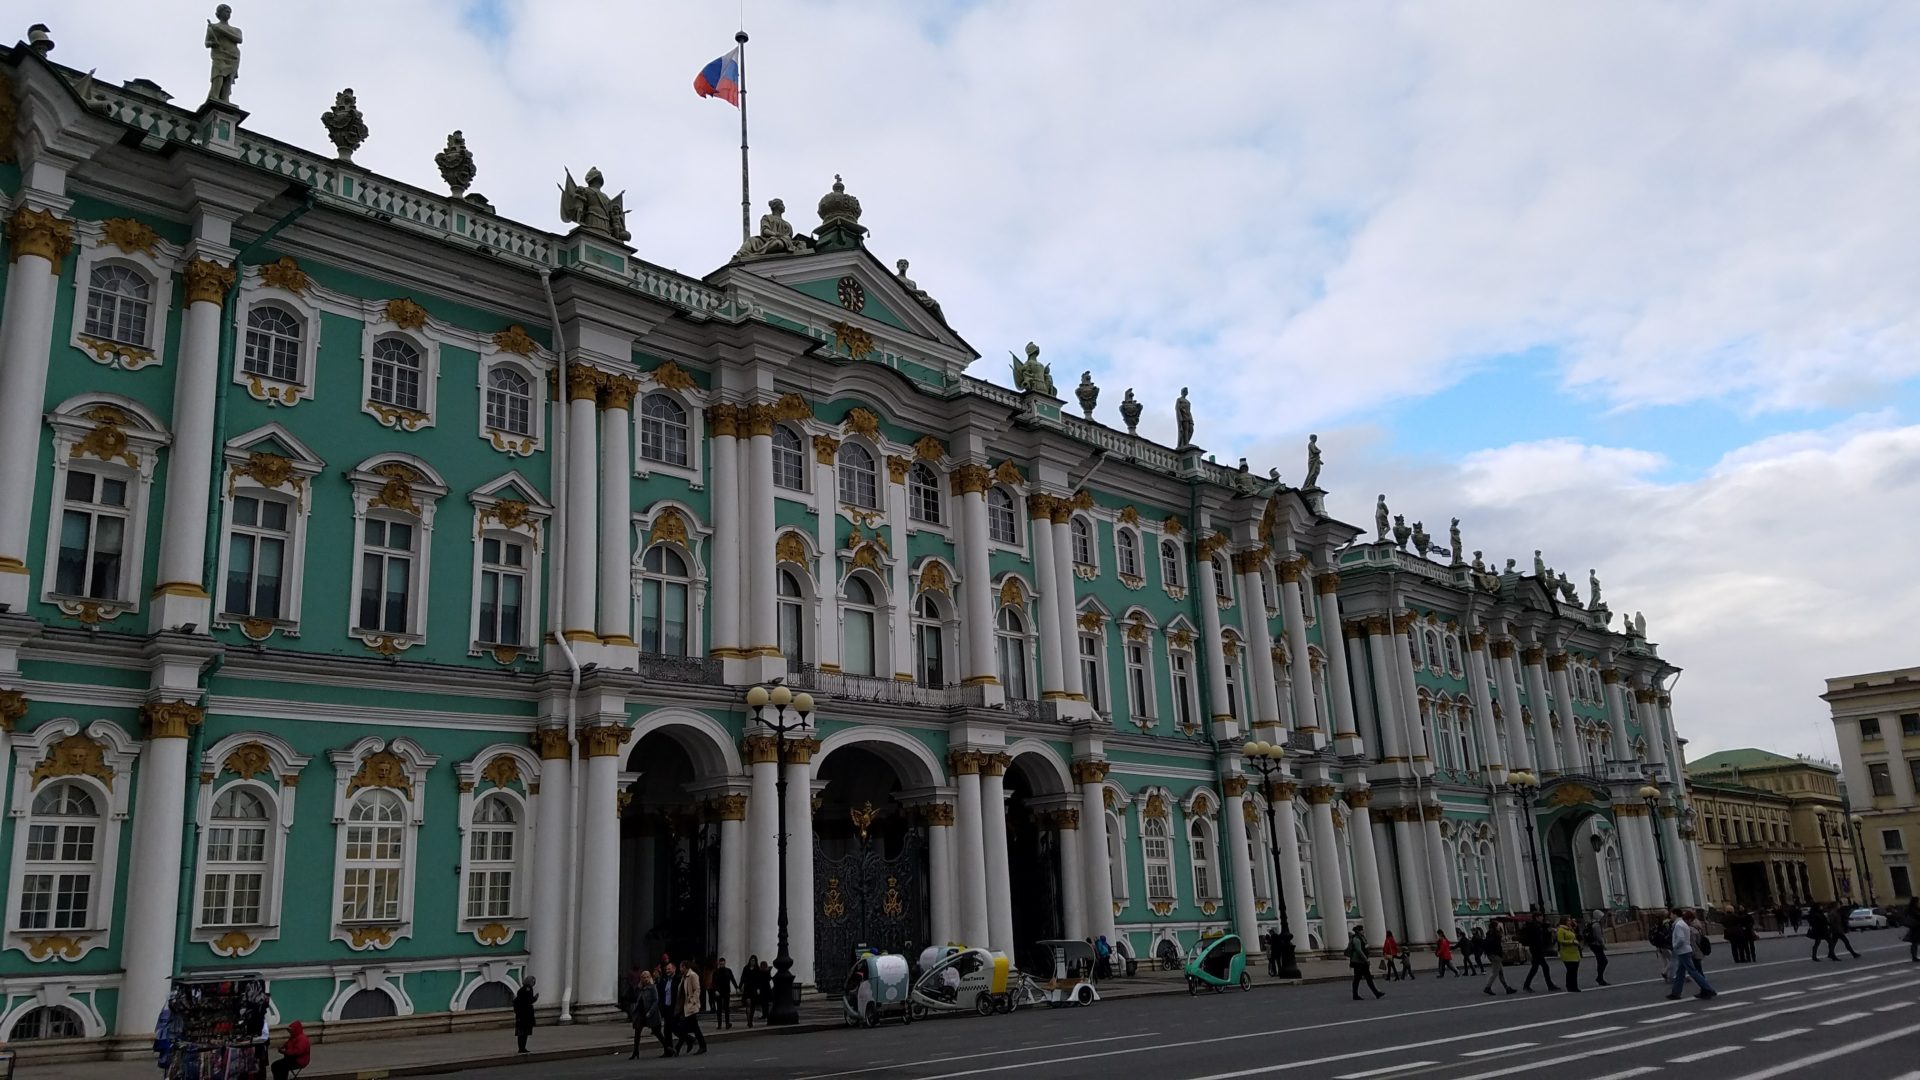 Winter Palace with columns and statues on top of it